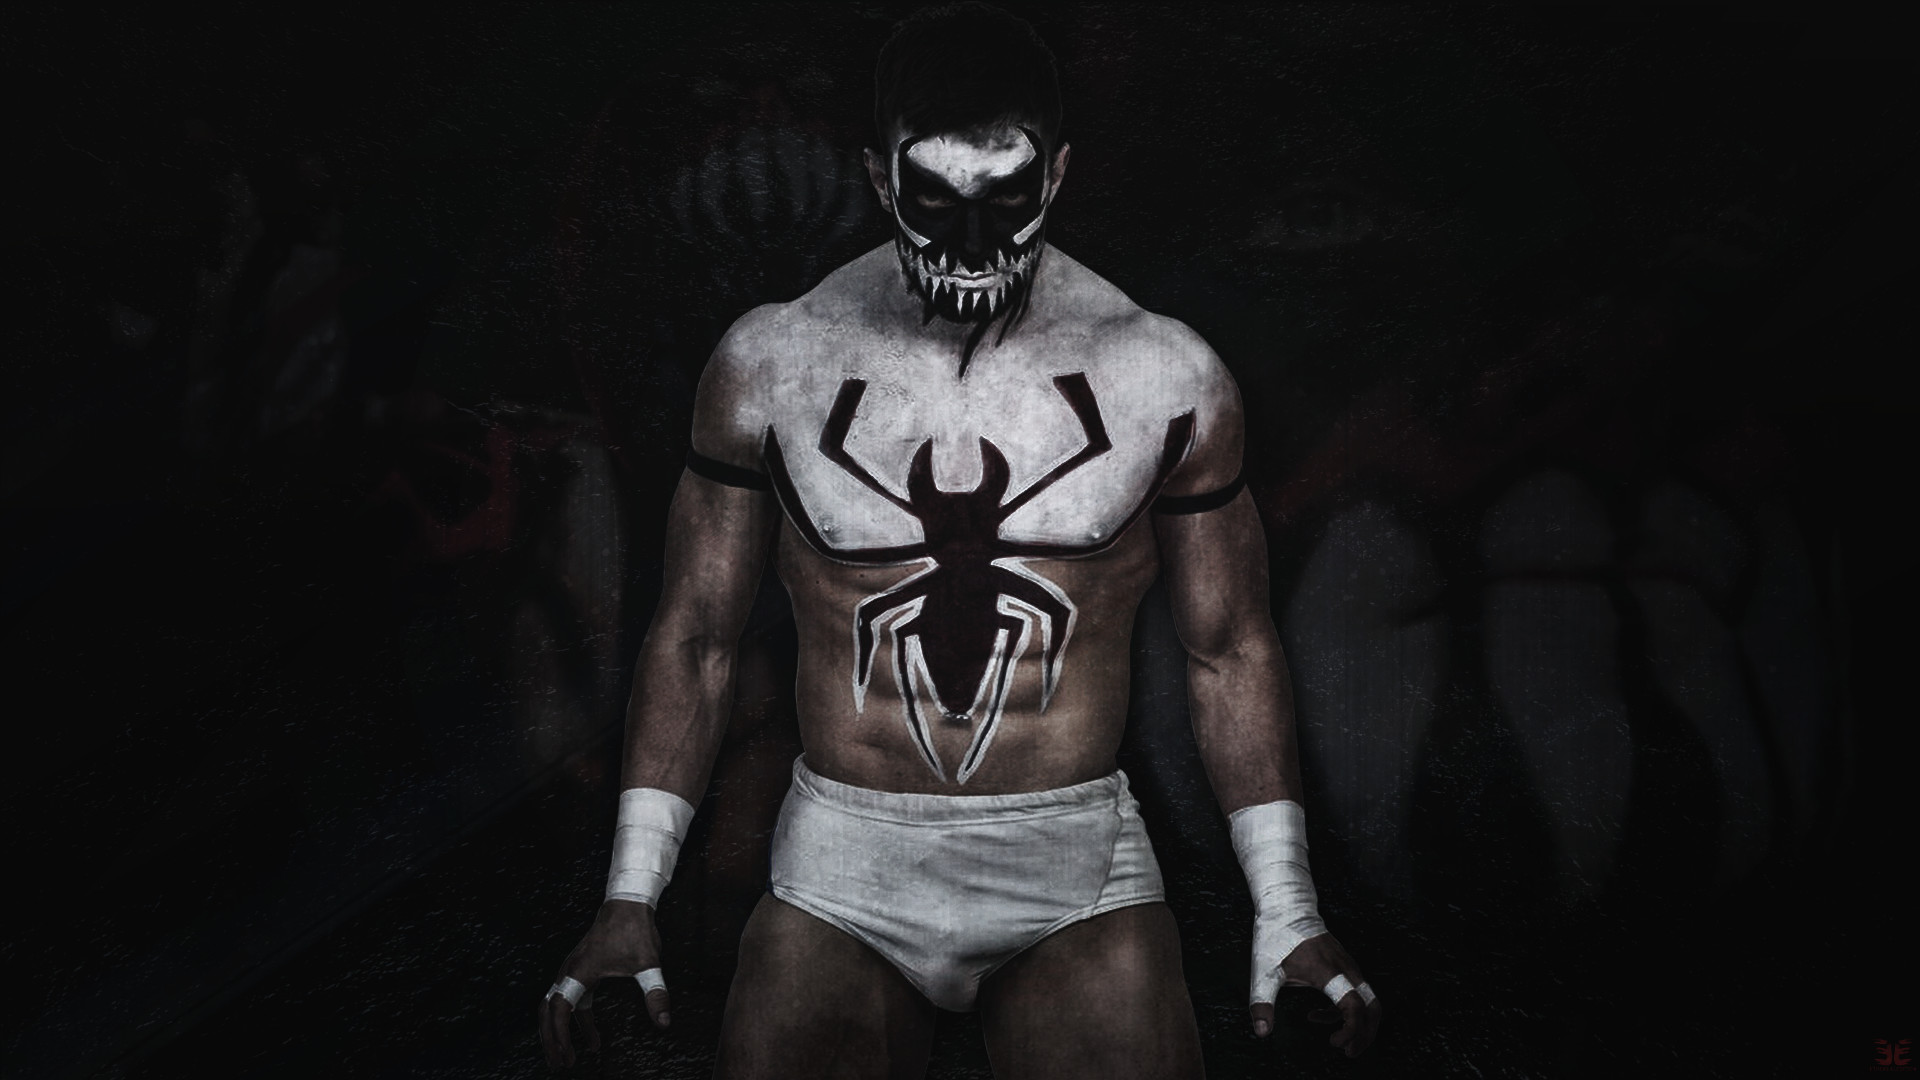 1920x1080 ... Finn Balor(Prince Devitt) Wallpaper(By Ethereal) by EtherealEdition